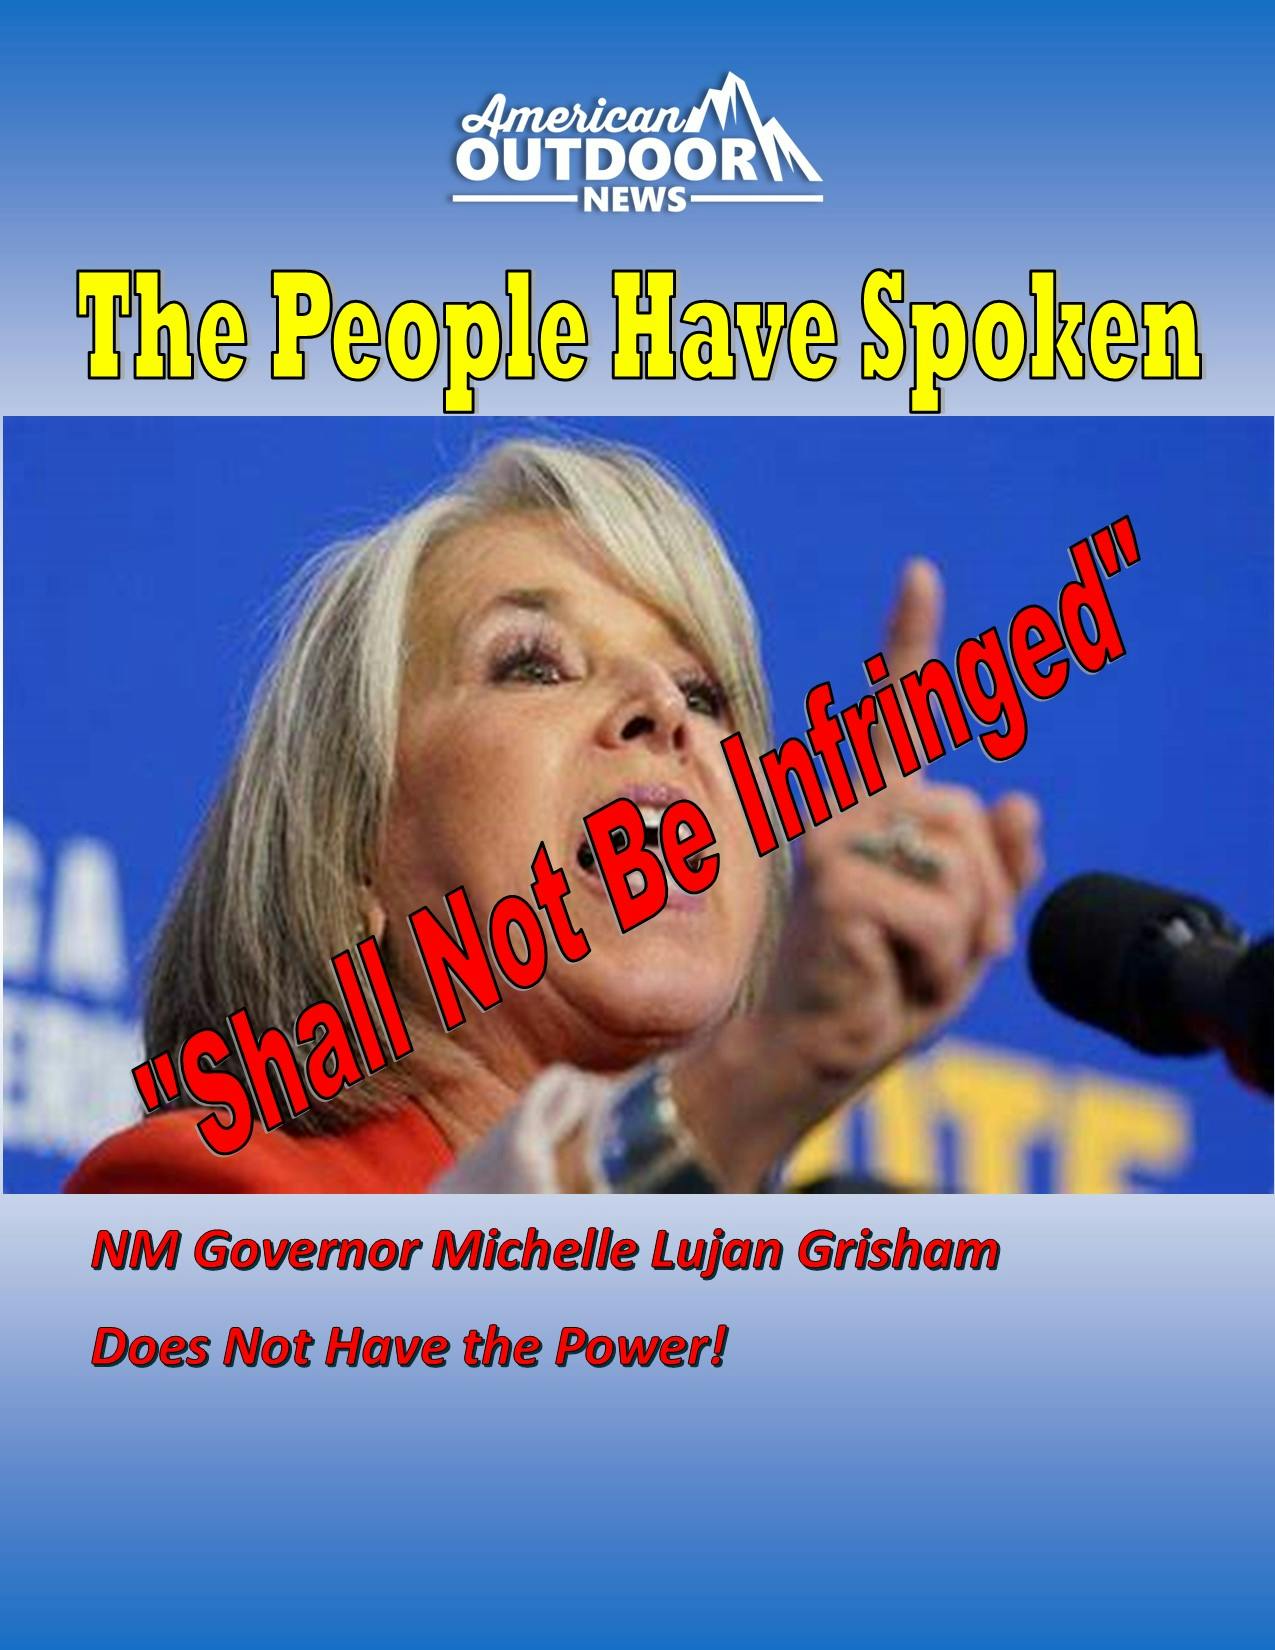 NM Gov Michelle Lujan Grisham Does Not have the Power